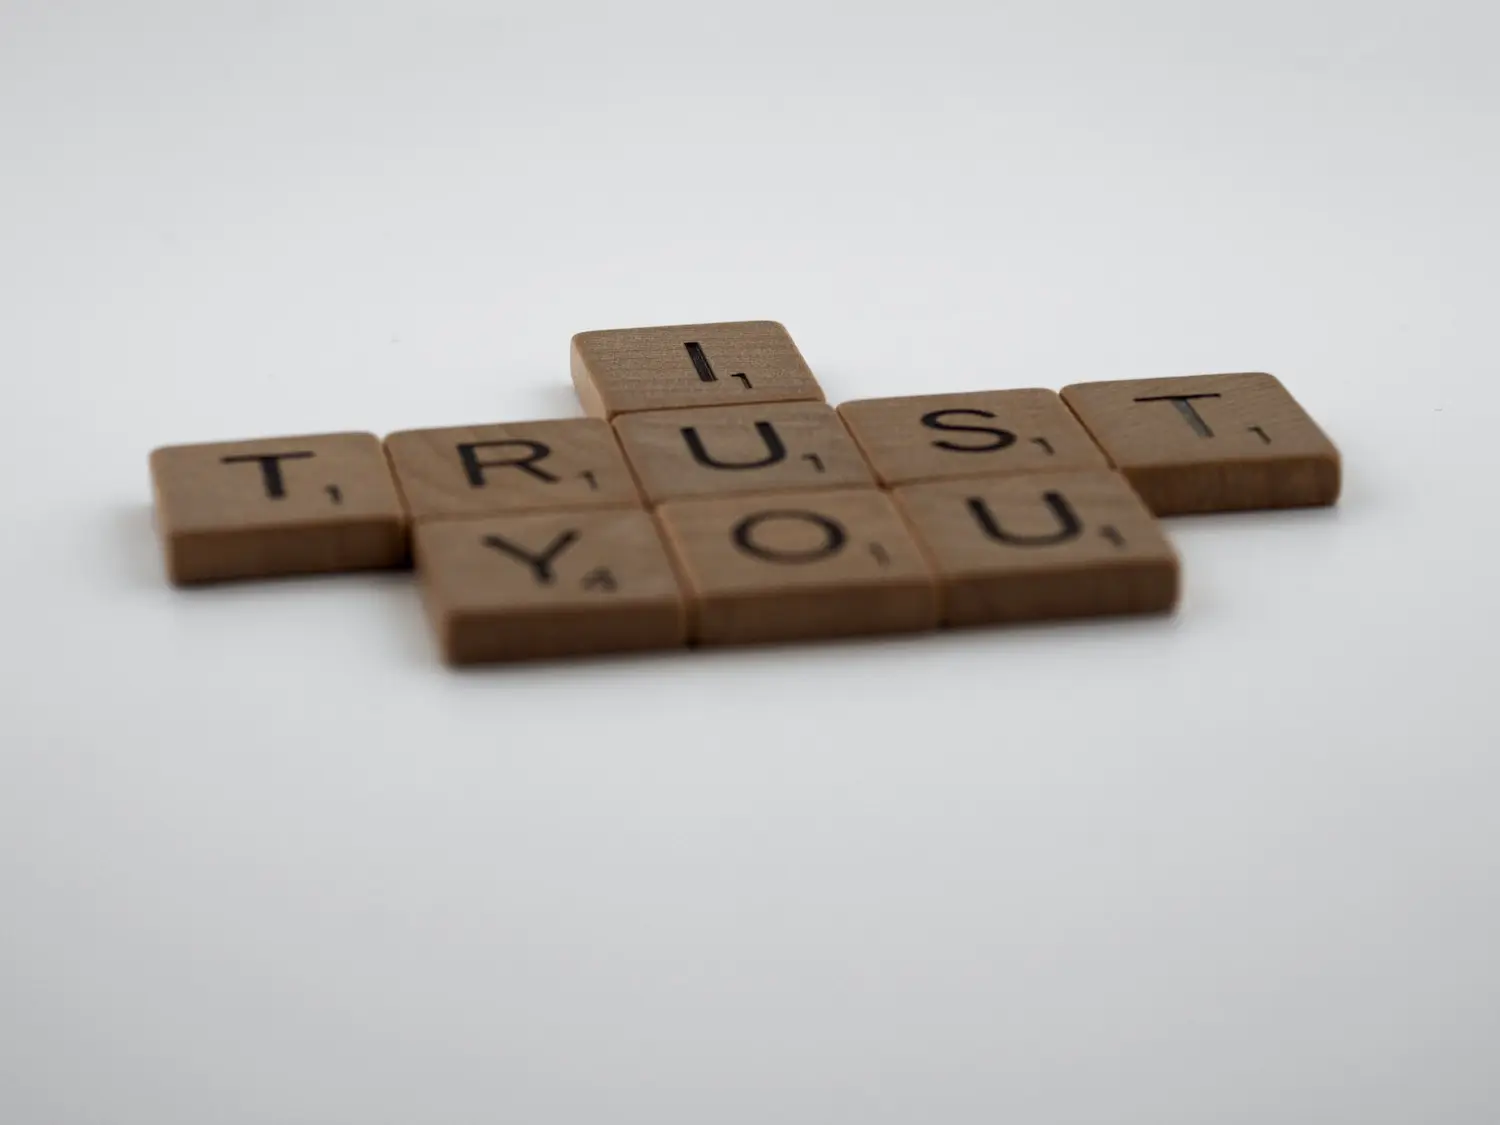 How Do You Figure Out Whom You Can Trust?